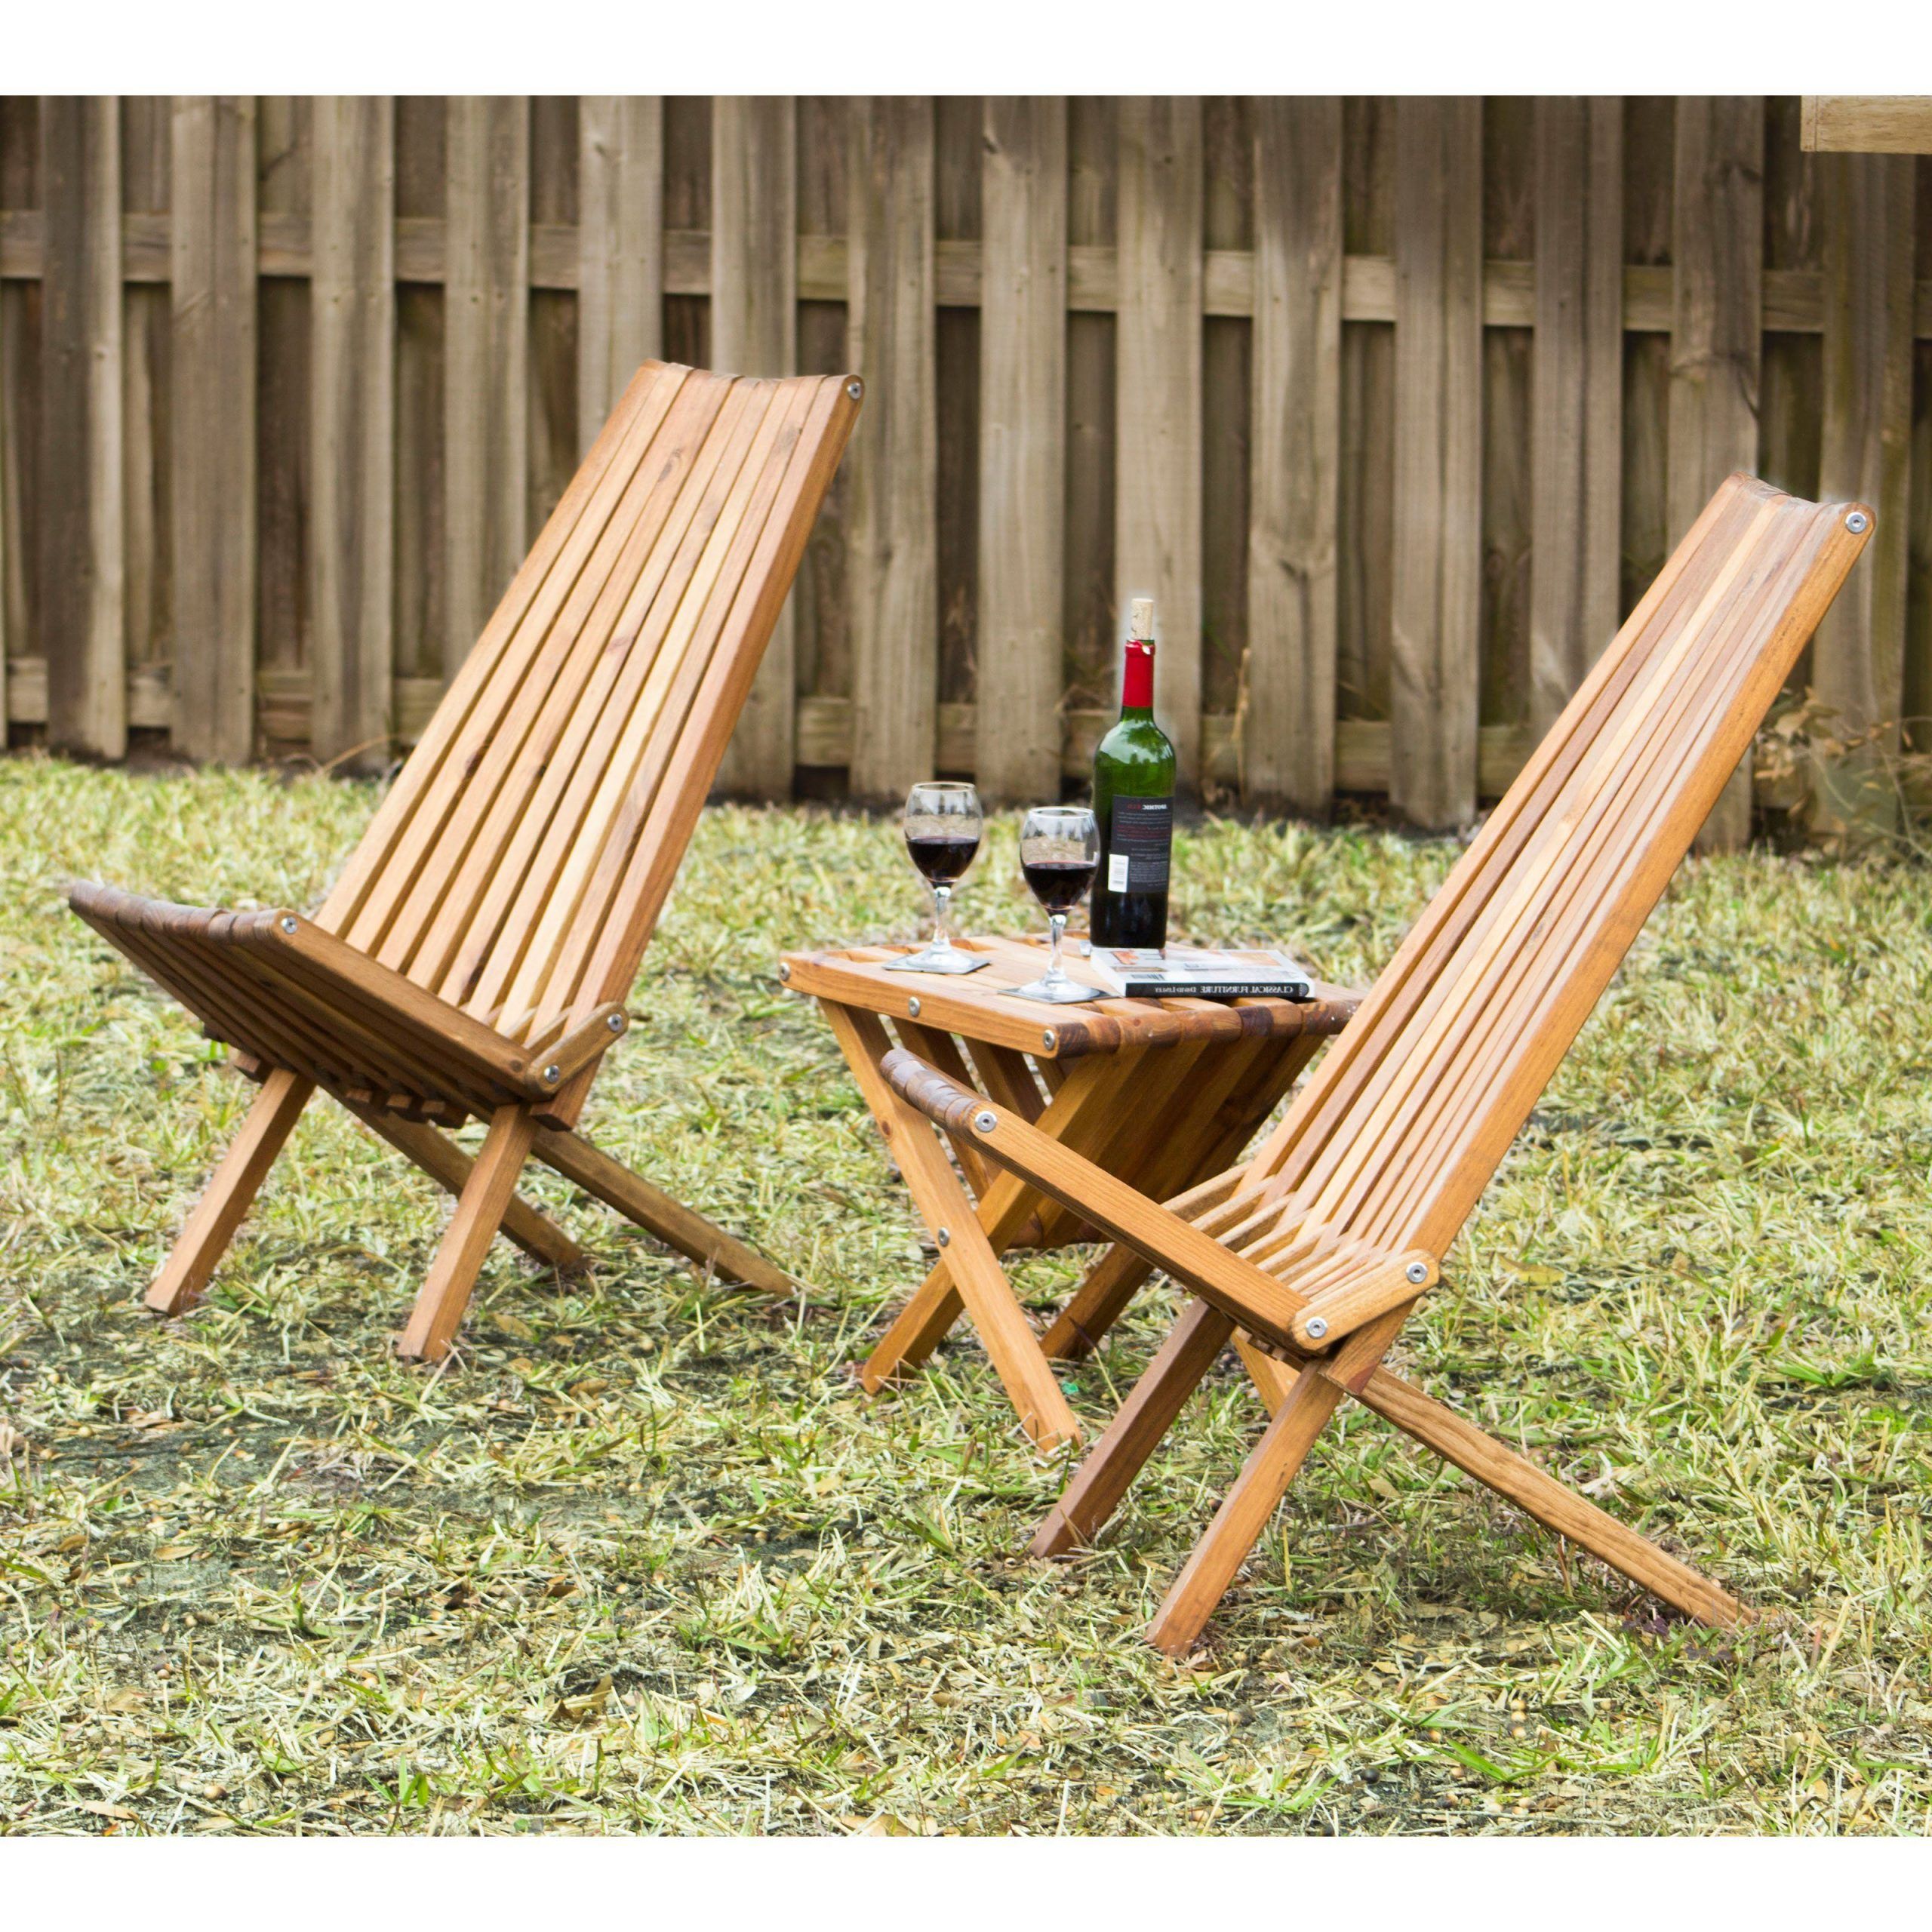 Wood Outdoor Armchair Sets Inside Preferred Glodea Xquare X45 Foldable Wooden Tall Back Patio Lounge Chair (View 5 of 15)